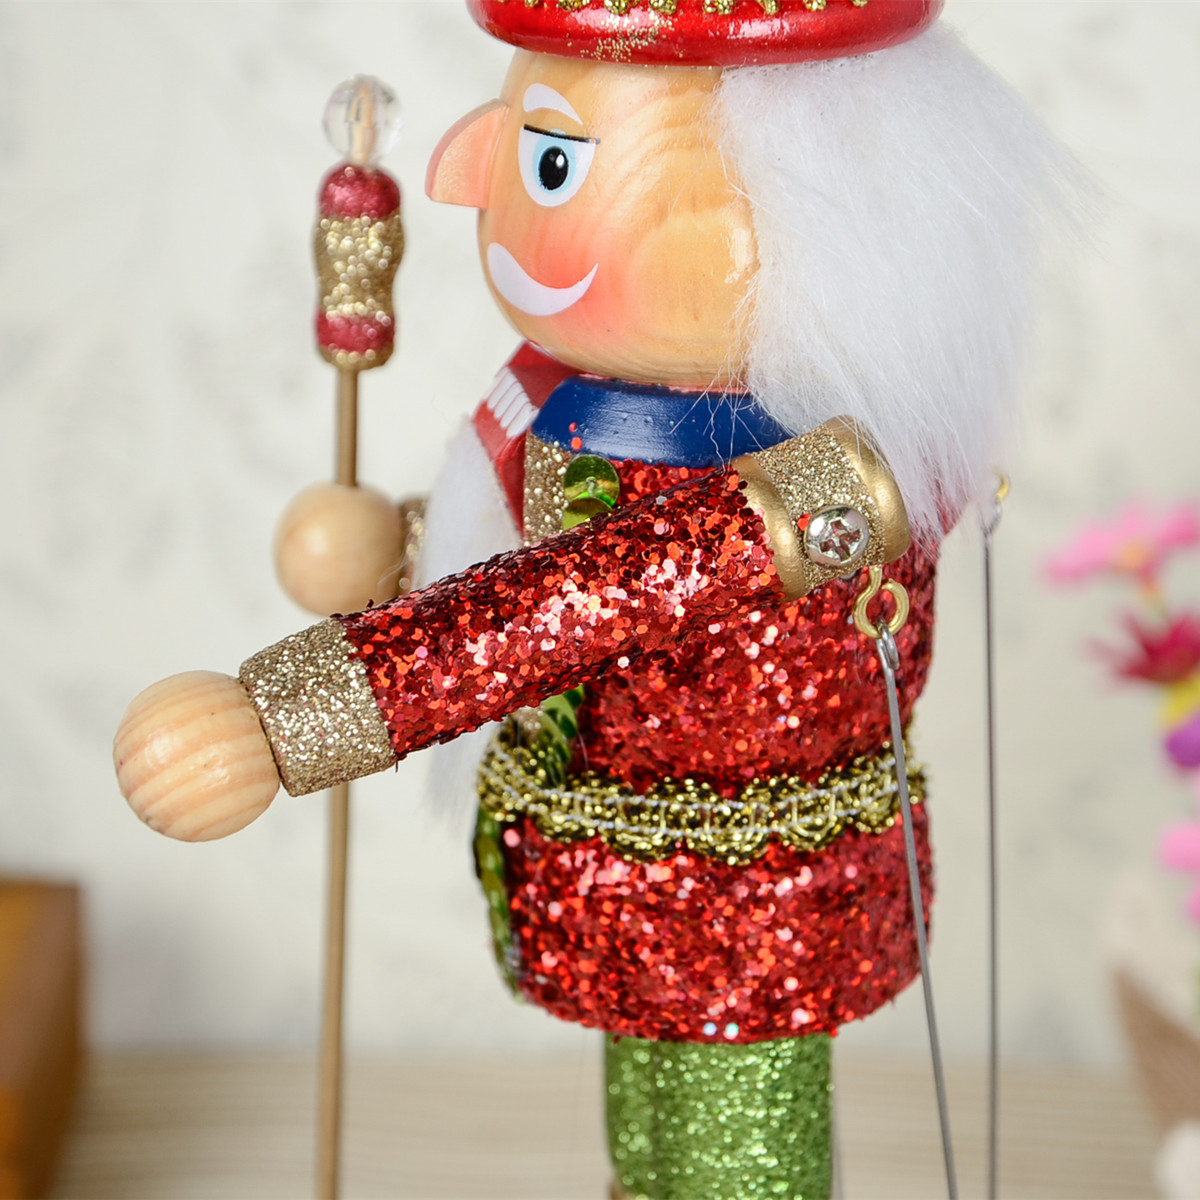 32cm-Wooden-Music-Box-Nutcracker-Doll-Soldier-Vintage-Handcraft-Decoration-Christmas-Gifts-1398446-4